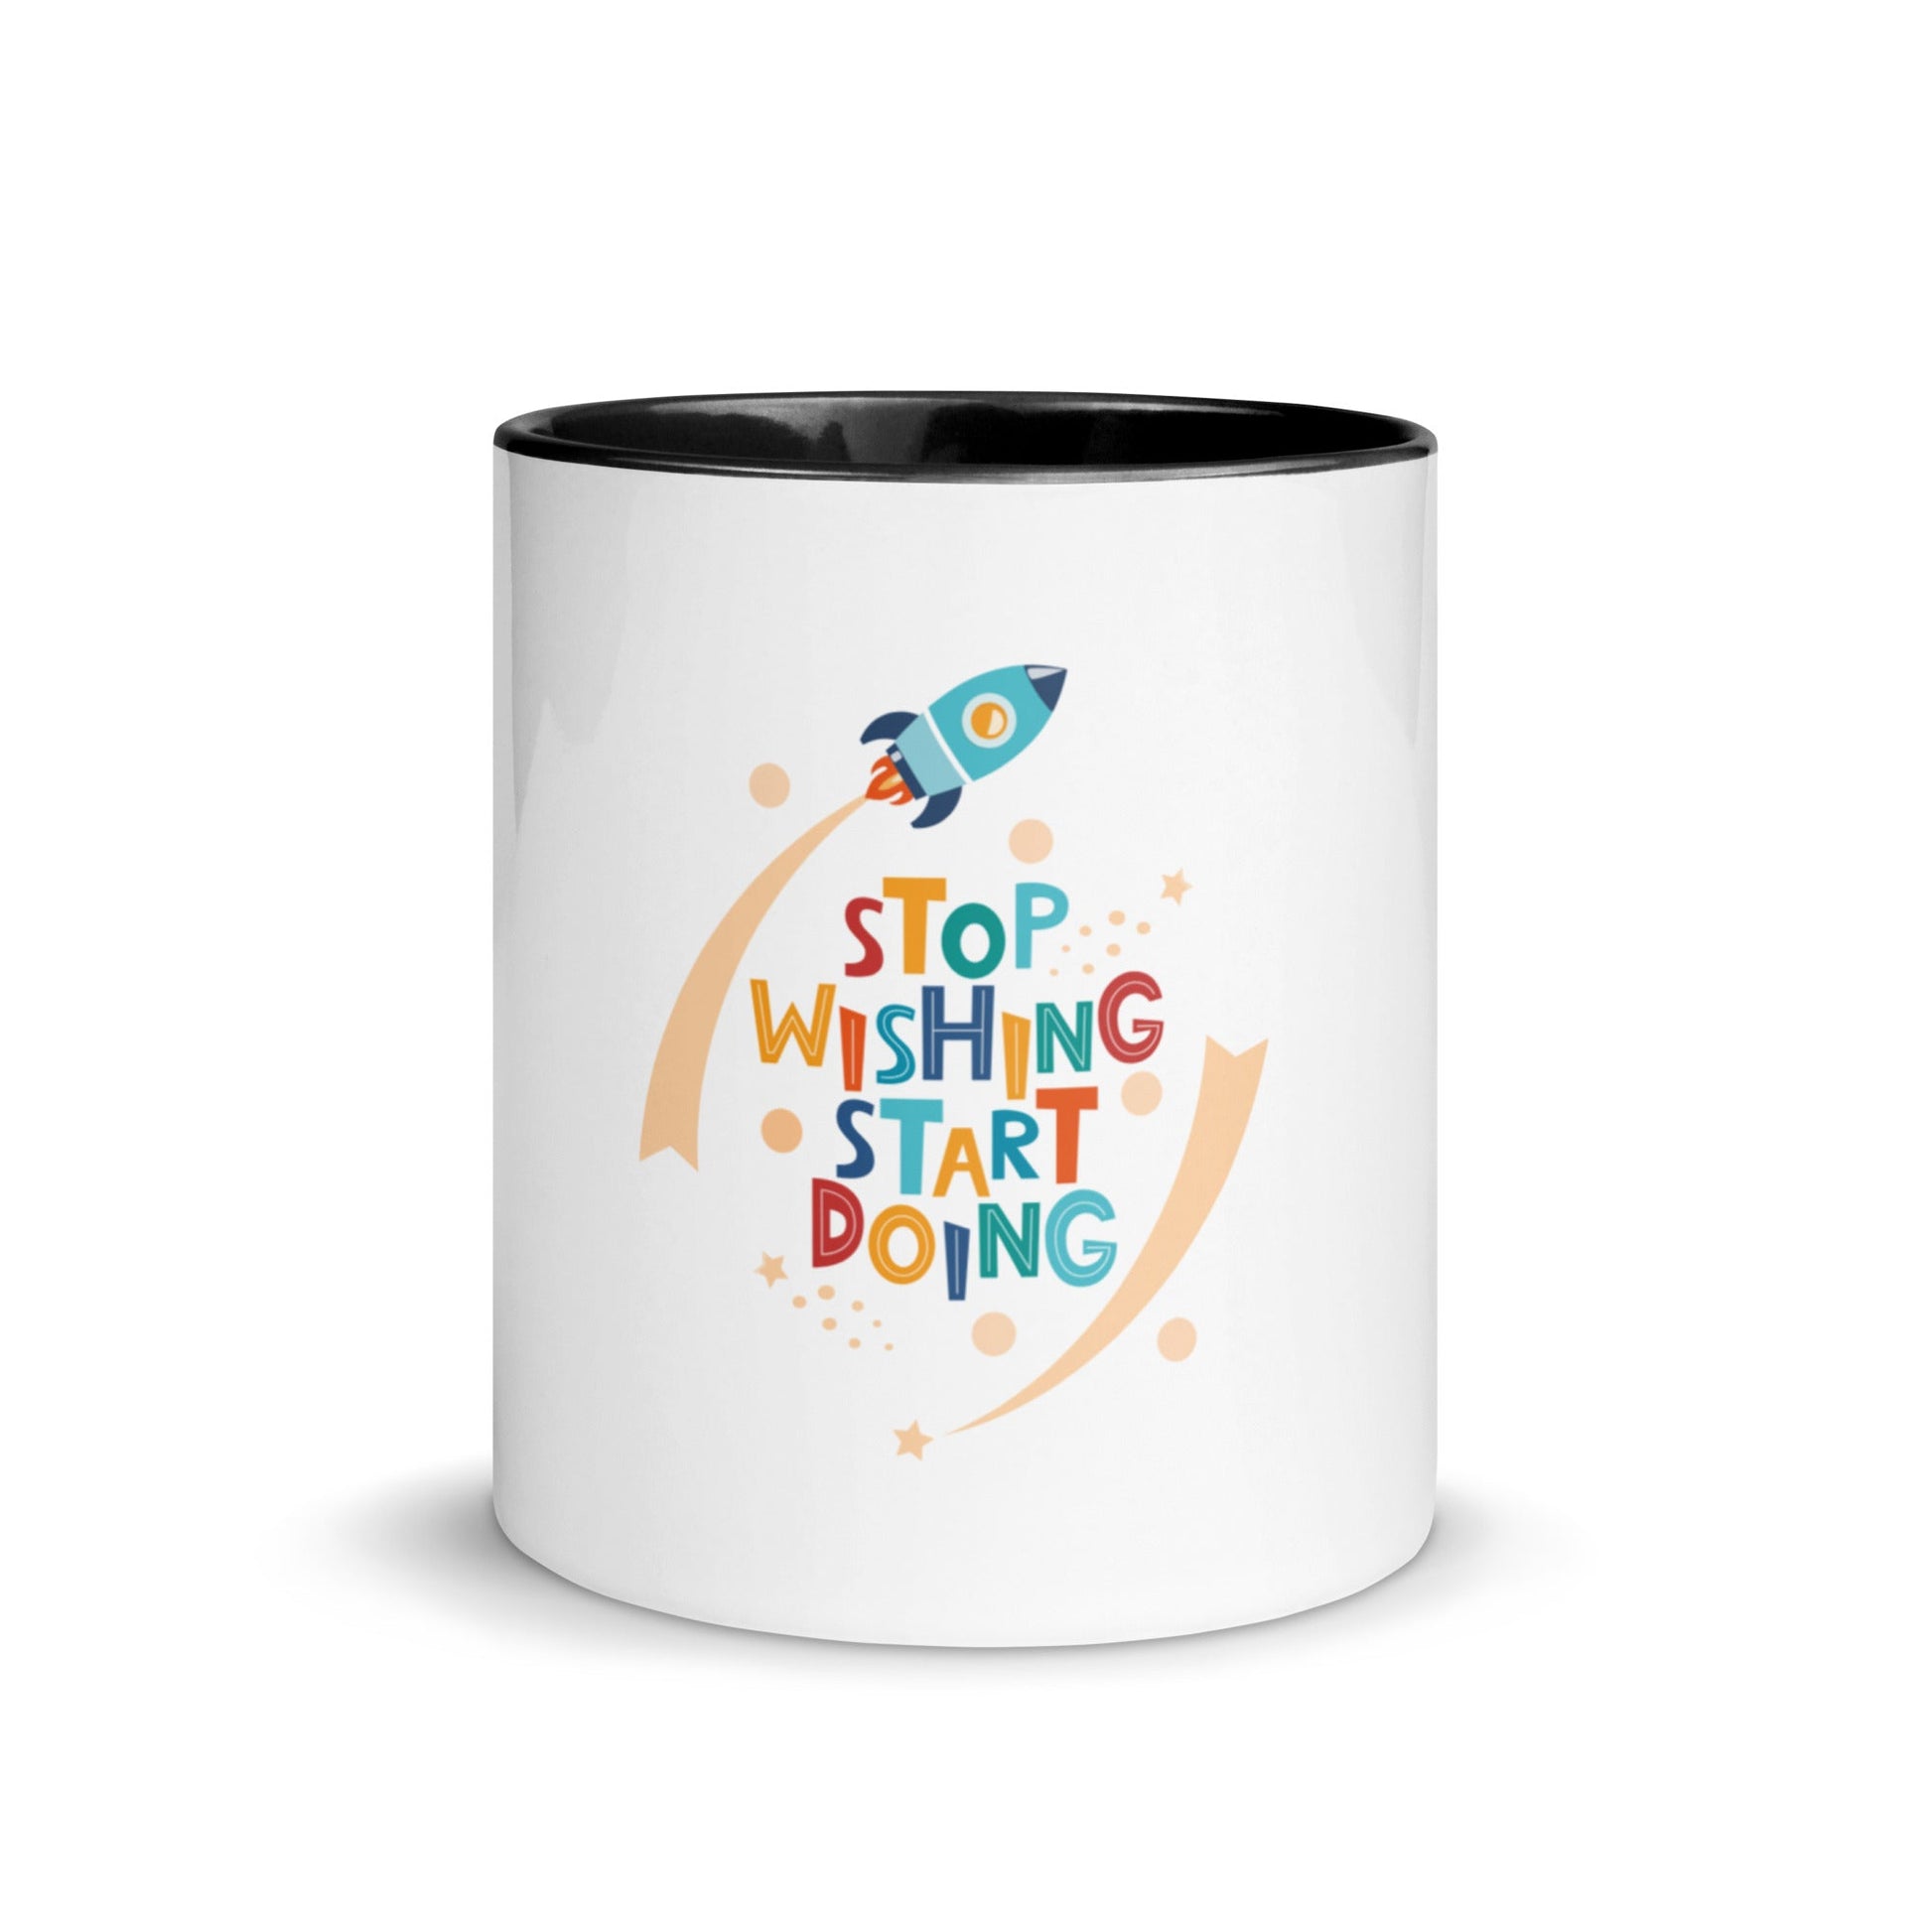 Stop Wishing, Start Doing Mug - Transform Dreams into Reality | Motivational Coffee Cup for Action Takers